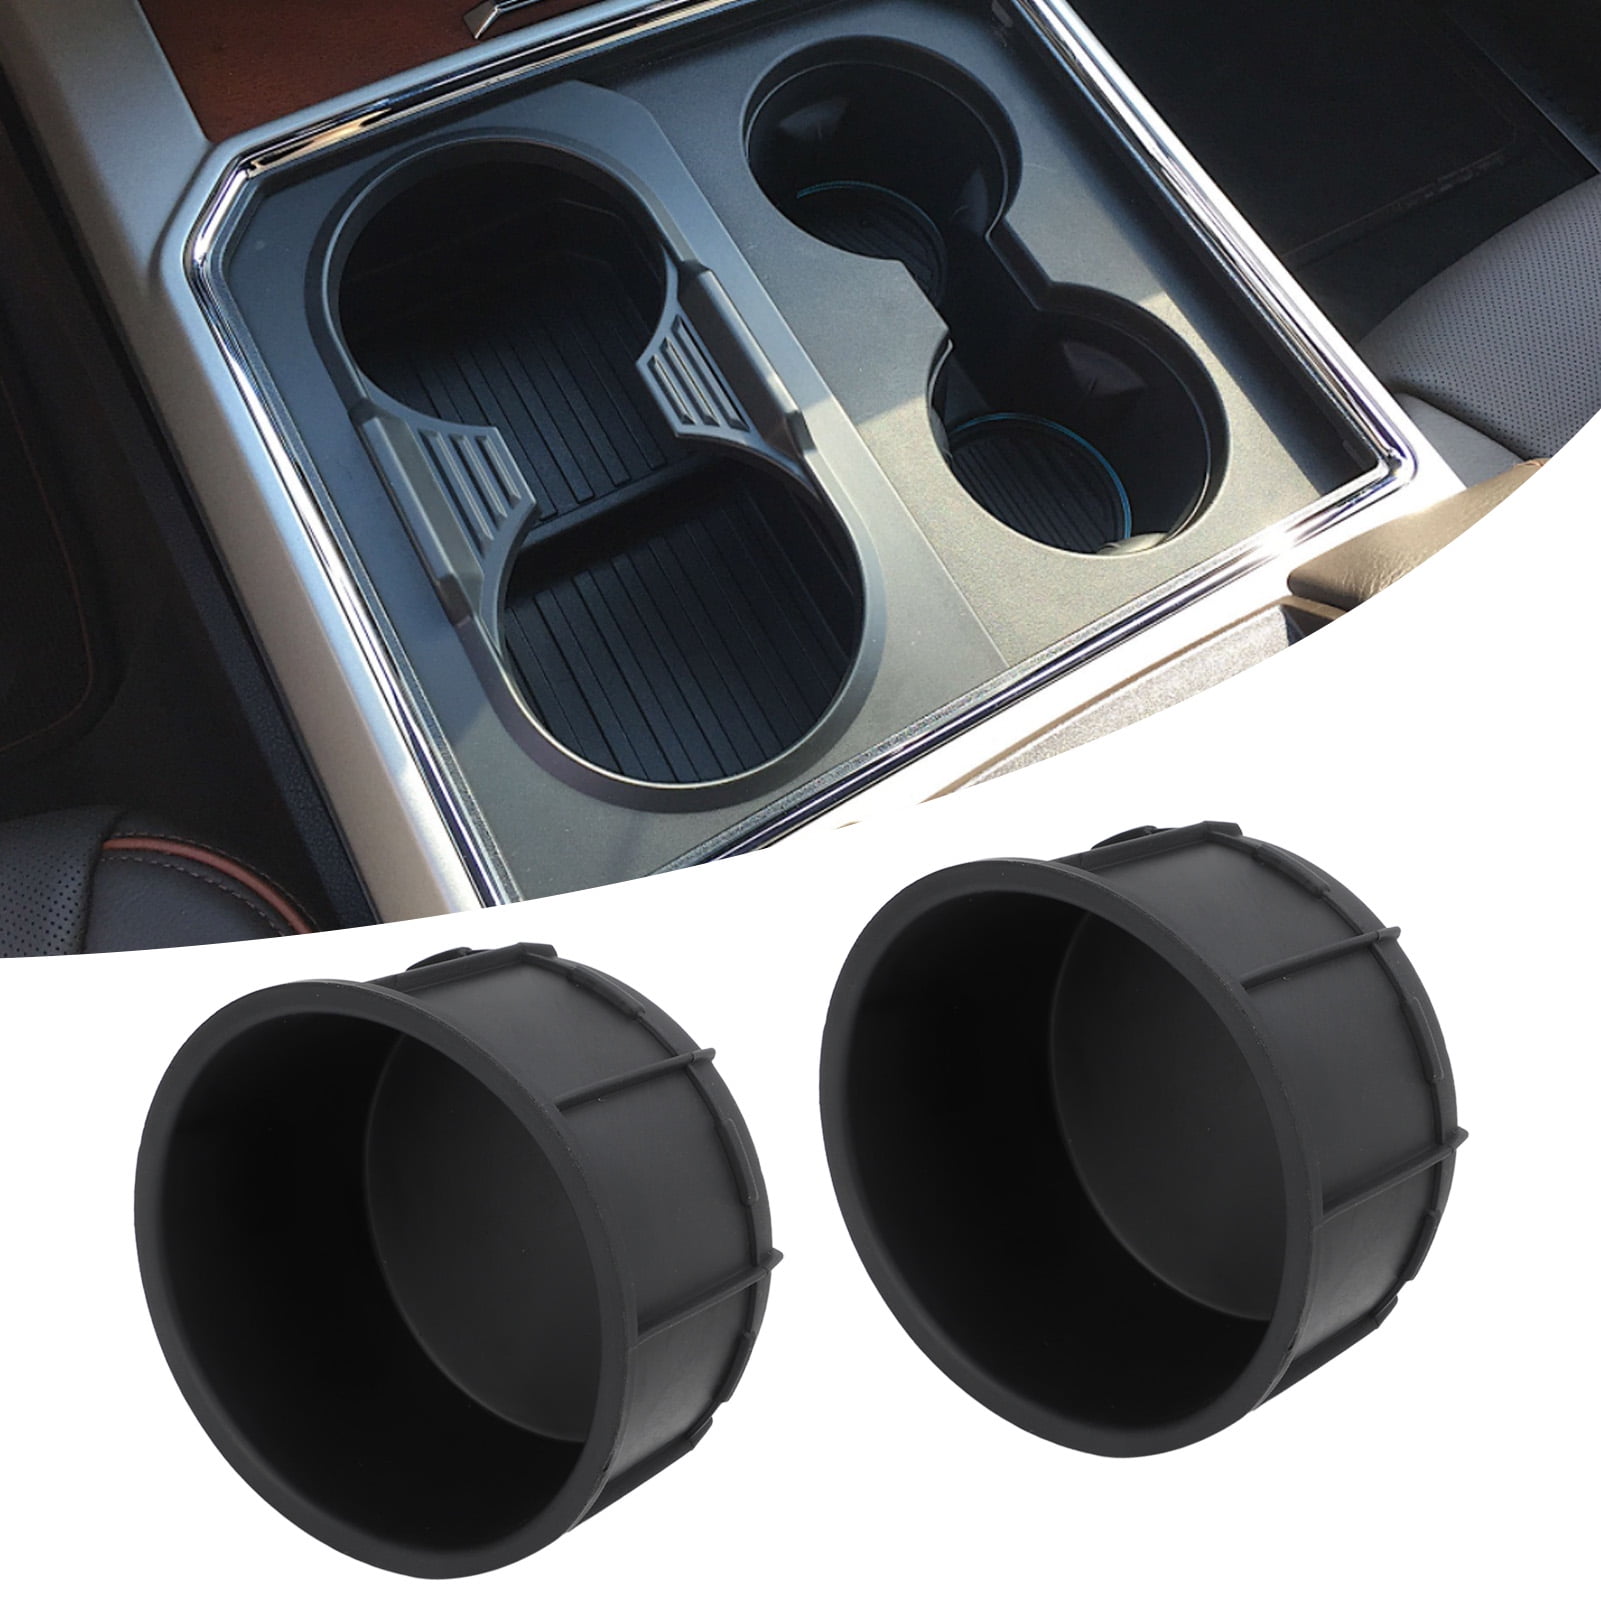 Auto Car Black Rubber Cup Holder Insert - China Cup Holder, Rubber